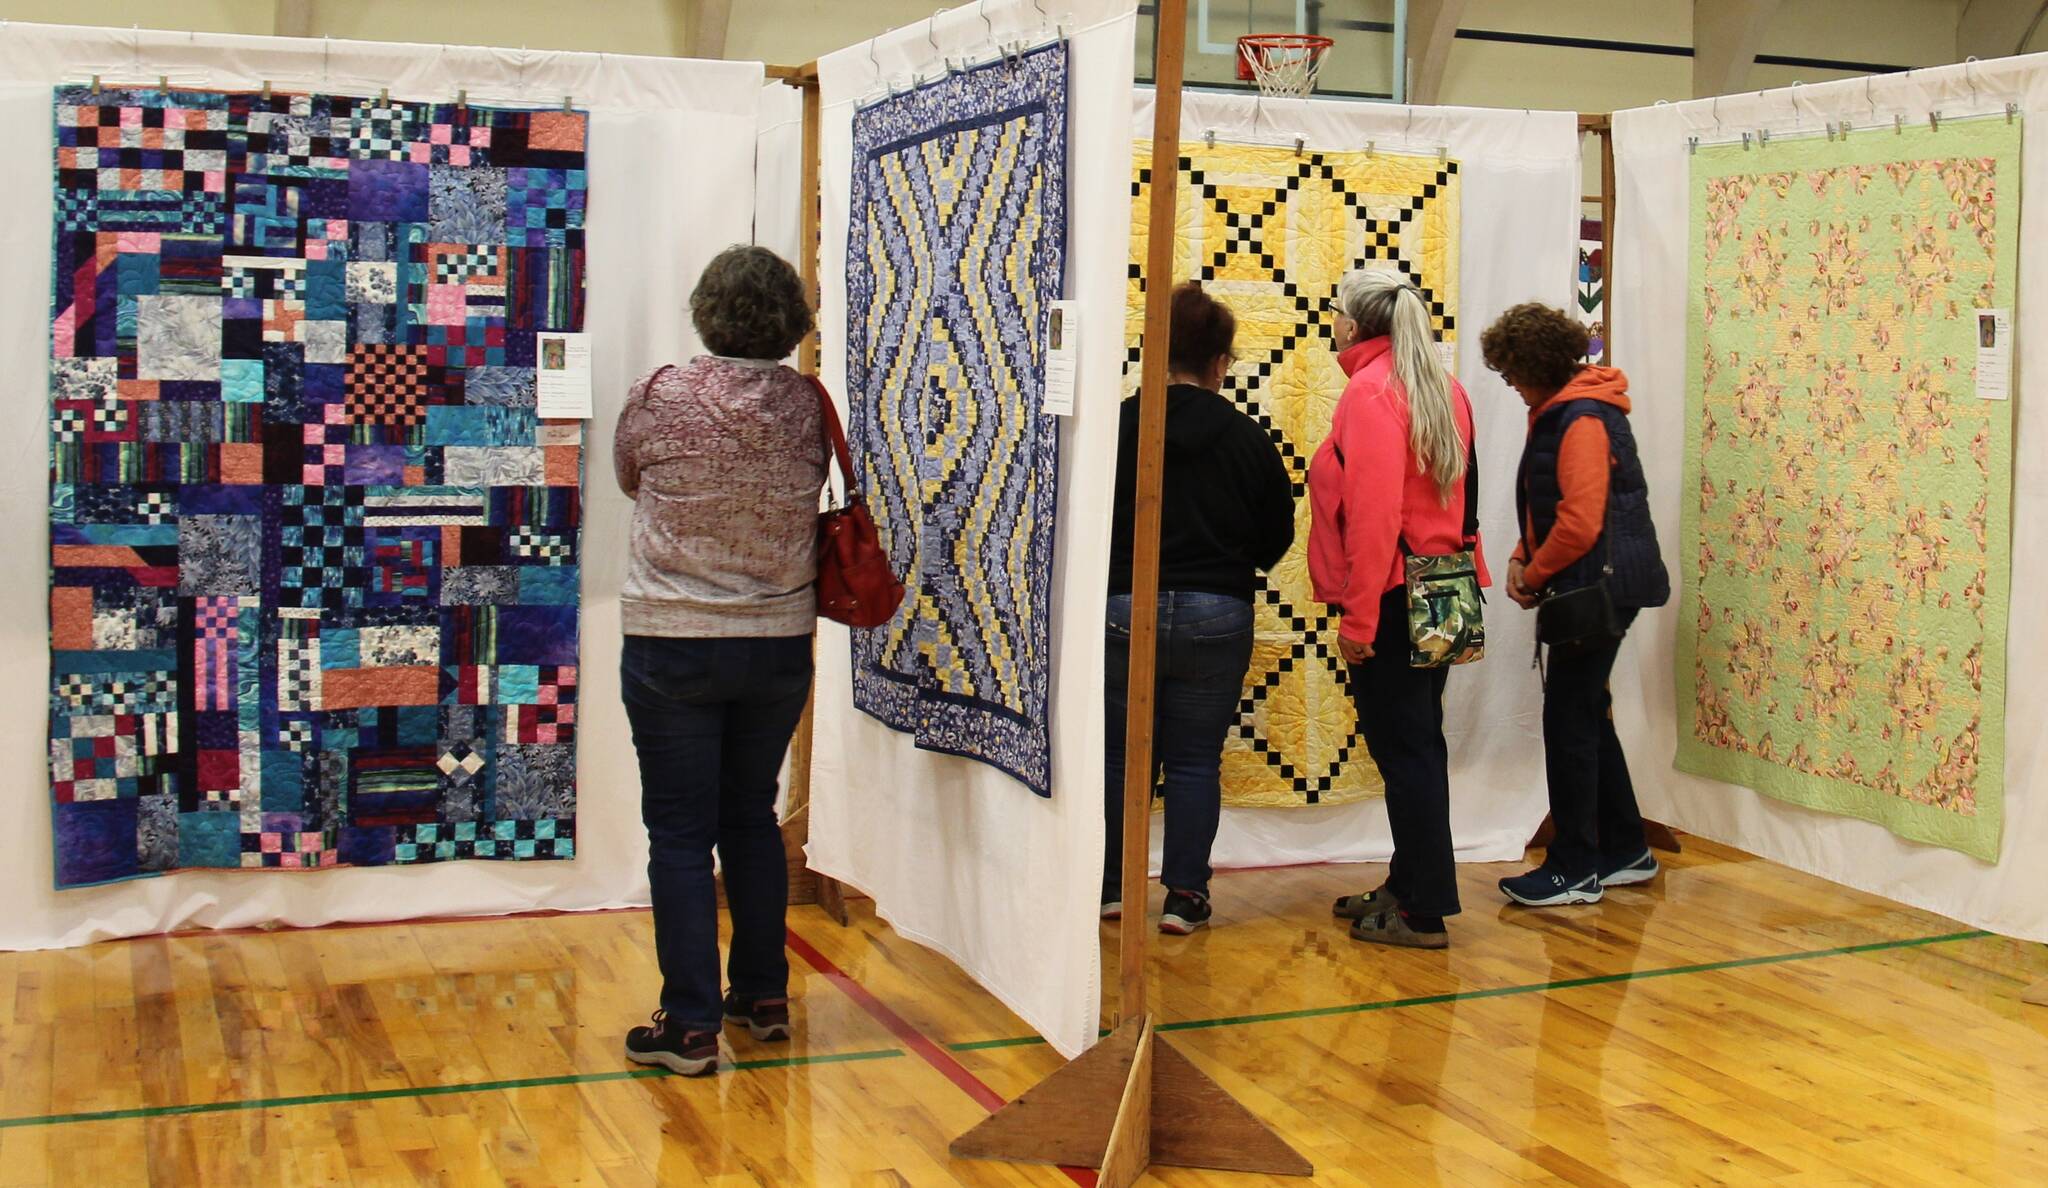 Over 100 beautiful quilts were on display over the weekend at the FHS auxiliary gym during the Piecemaker’s annual Fabric of the Forest Quilt Show. Here attendees take a closer look at some of the fine work done by local quilters. Winners of raffle items were - Quilts - Gretchen Fleck and Margaret Voyles; the gift basket winner was Pam Ogier. The club also offered several quilting classes. Photo Christi Baron